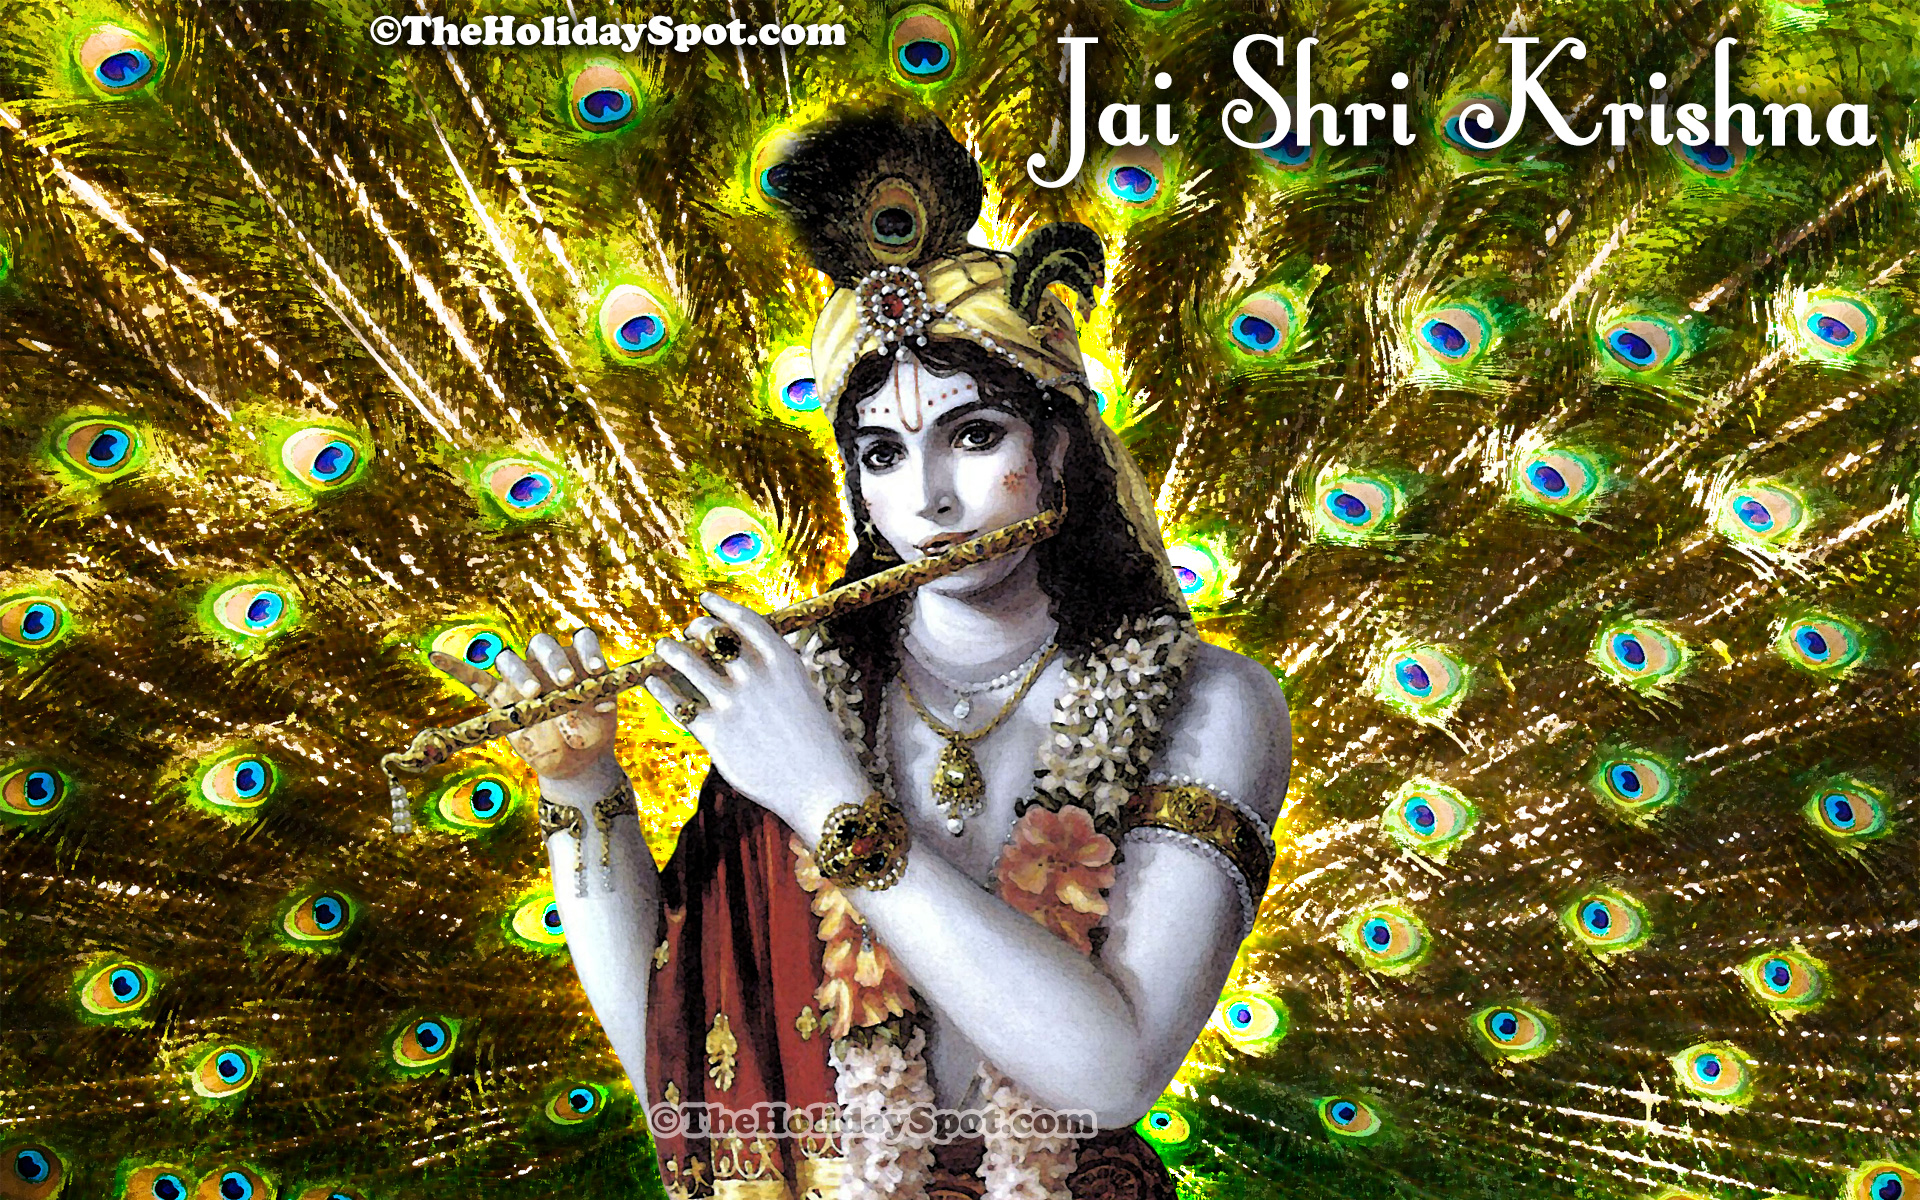 Adorn your desktop with this wonderful wallpaper of Lord Krishna